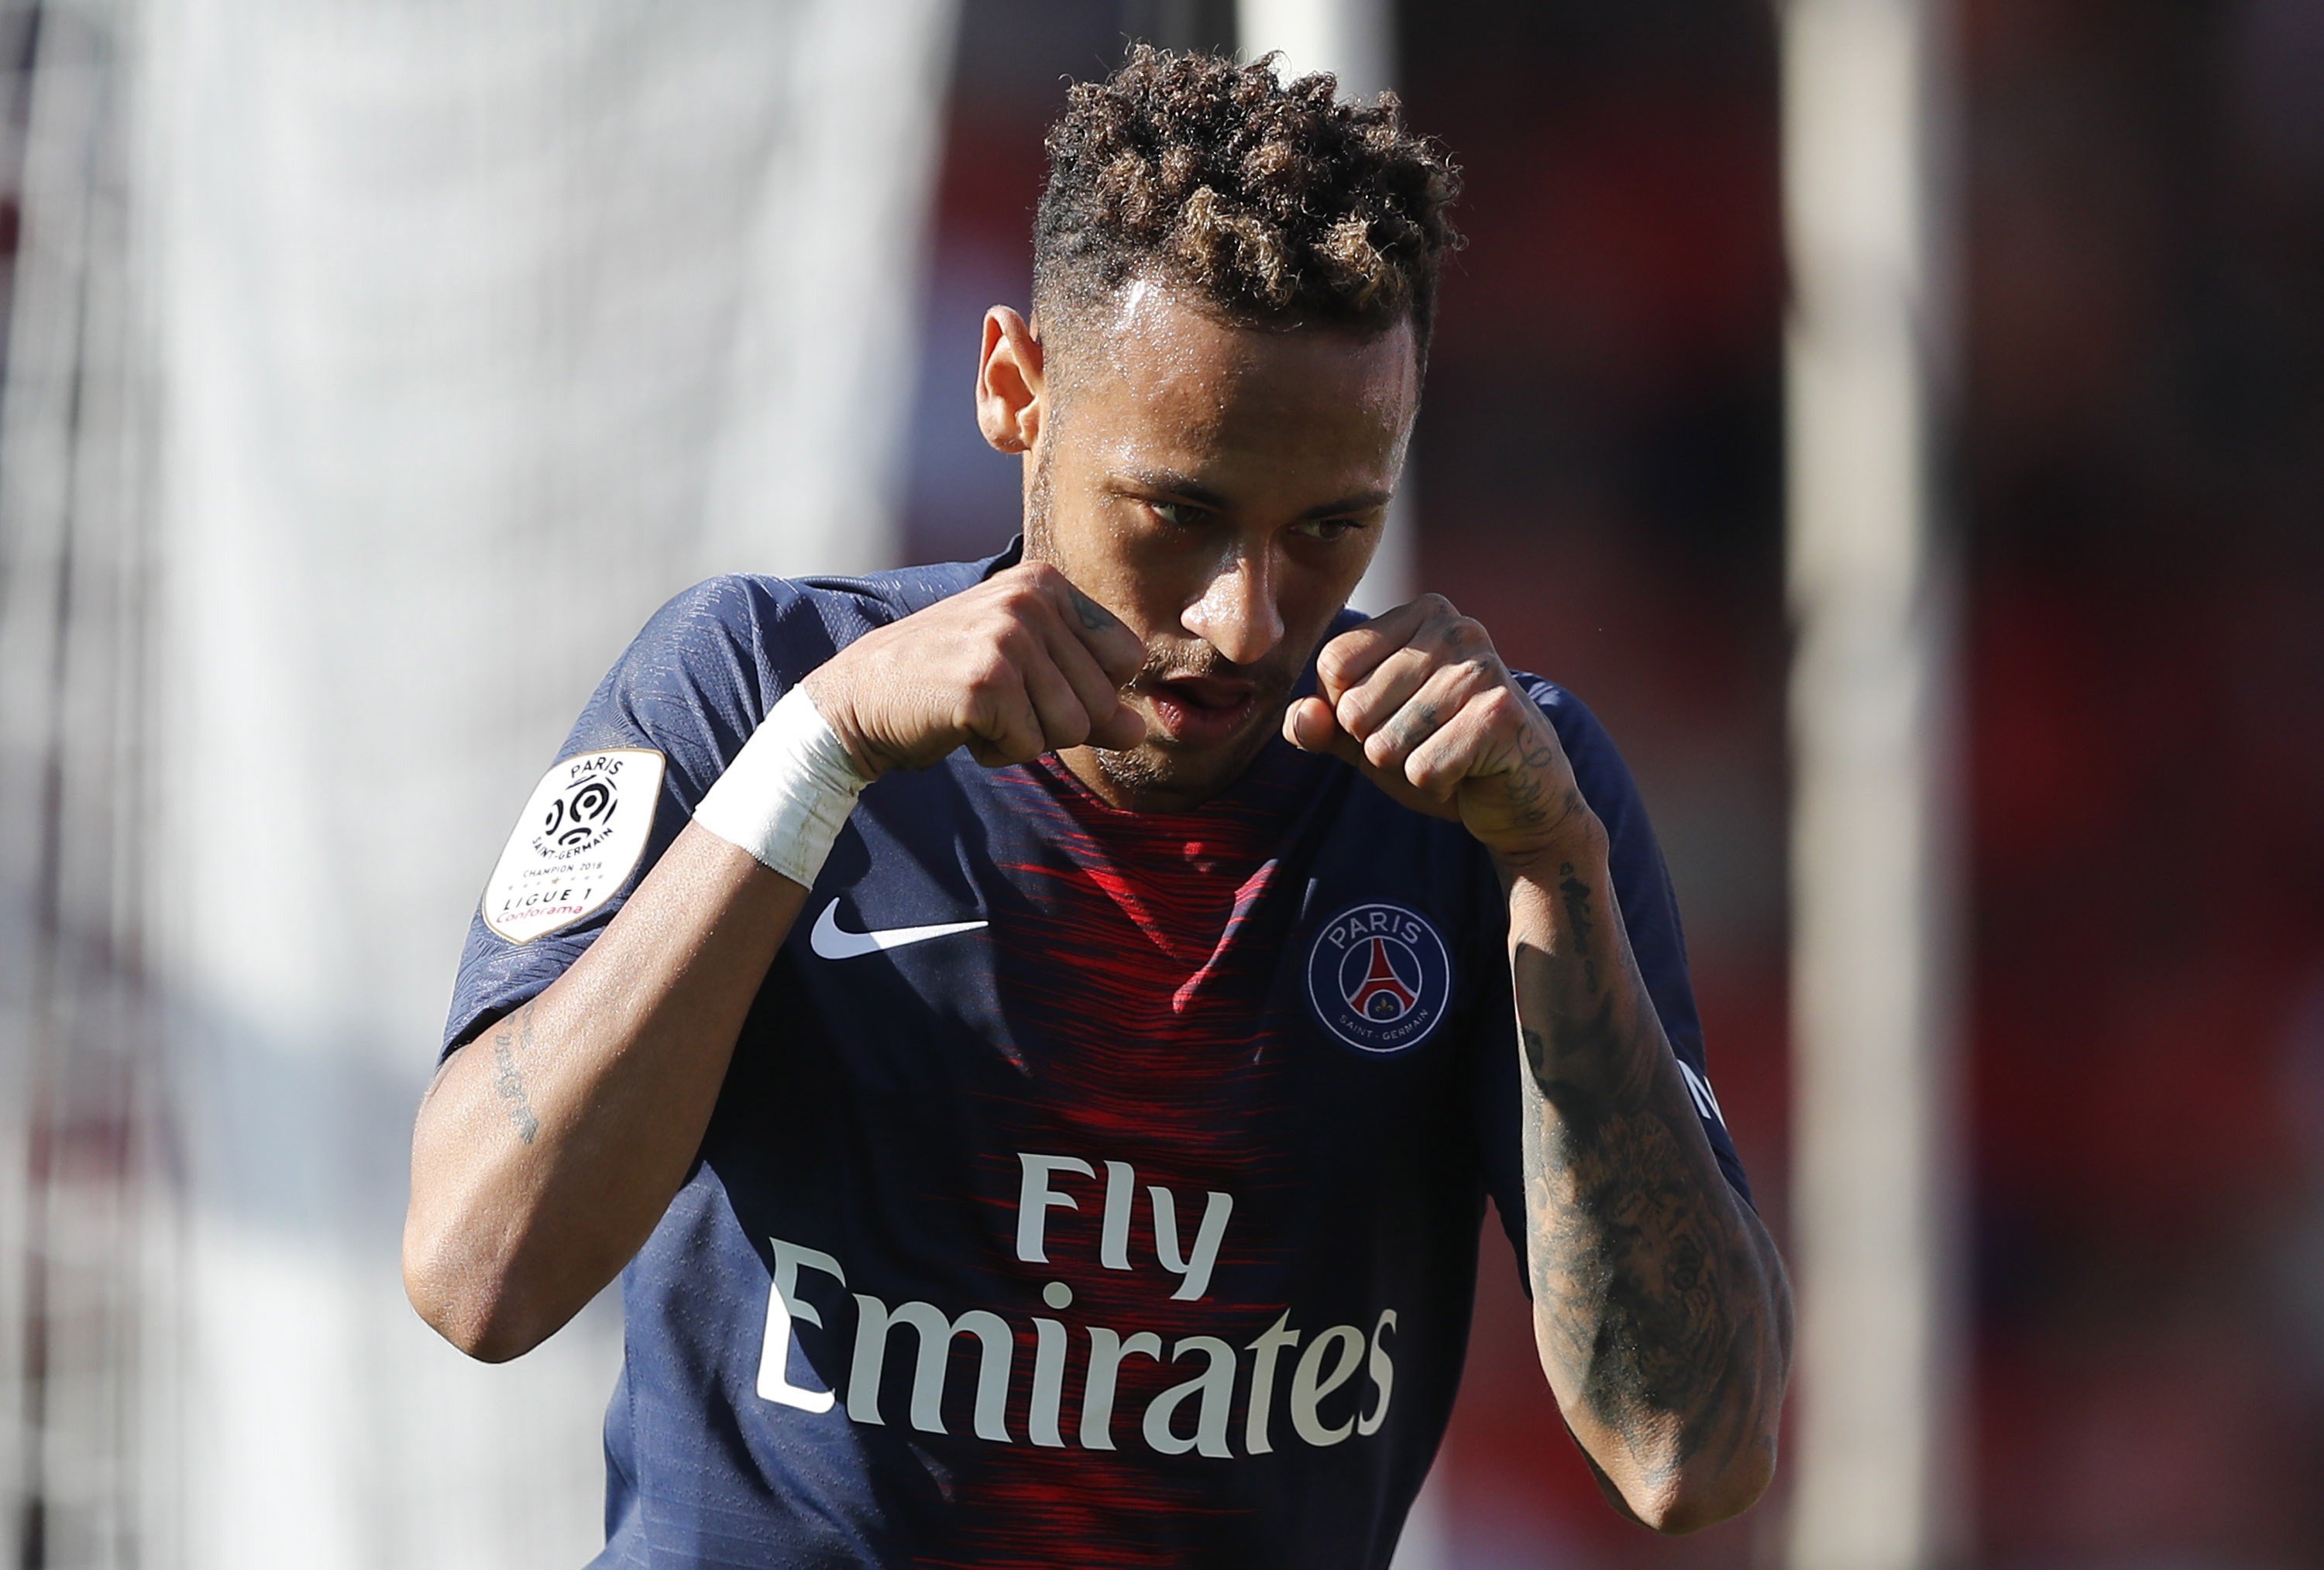 Paris Saint-Germain forward Neymar celebrates after scoring a goal during the French Ligue 1 soccer match against Nimes Olympique. Photo: EPA